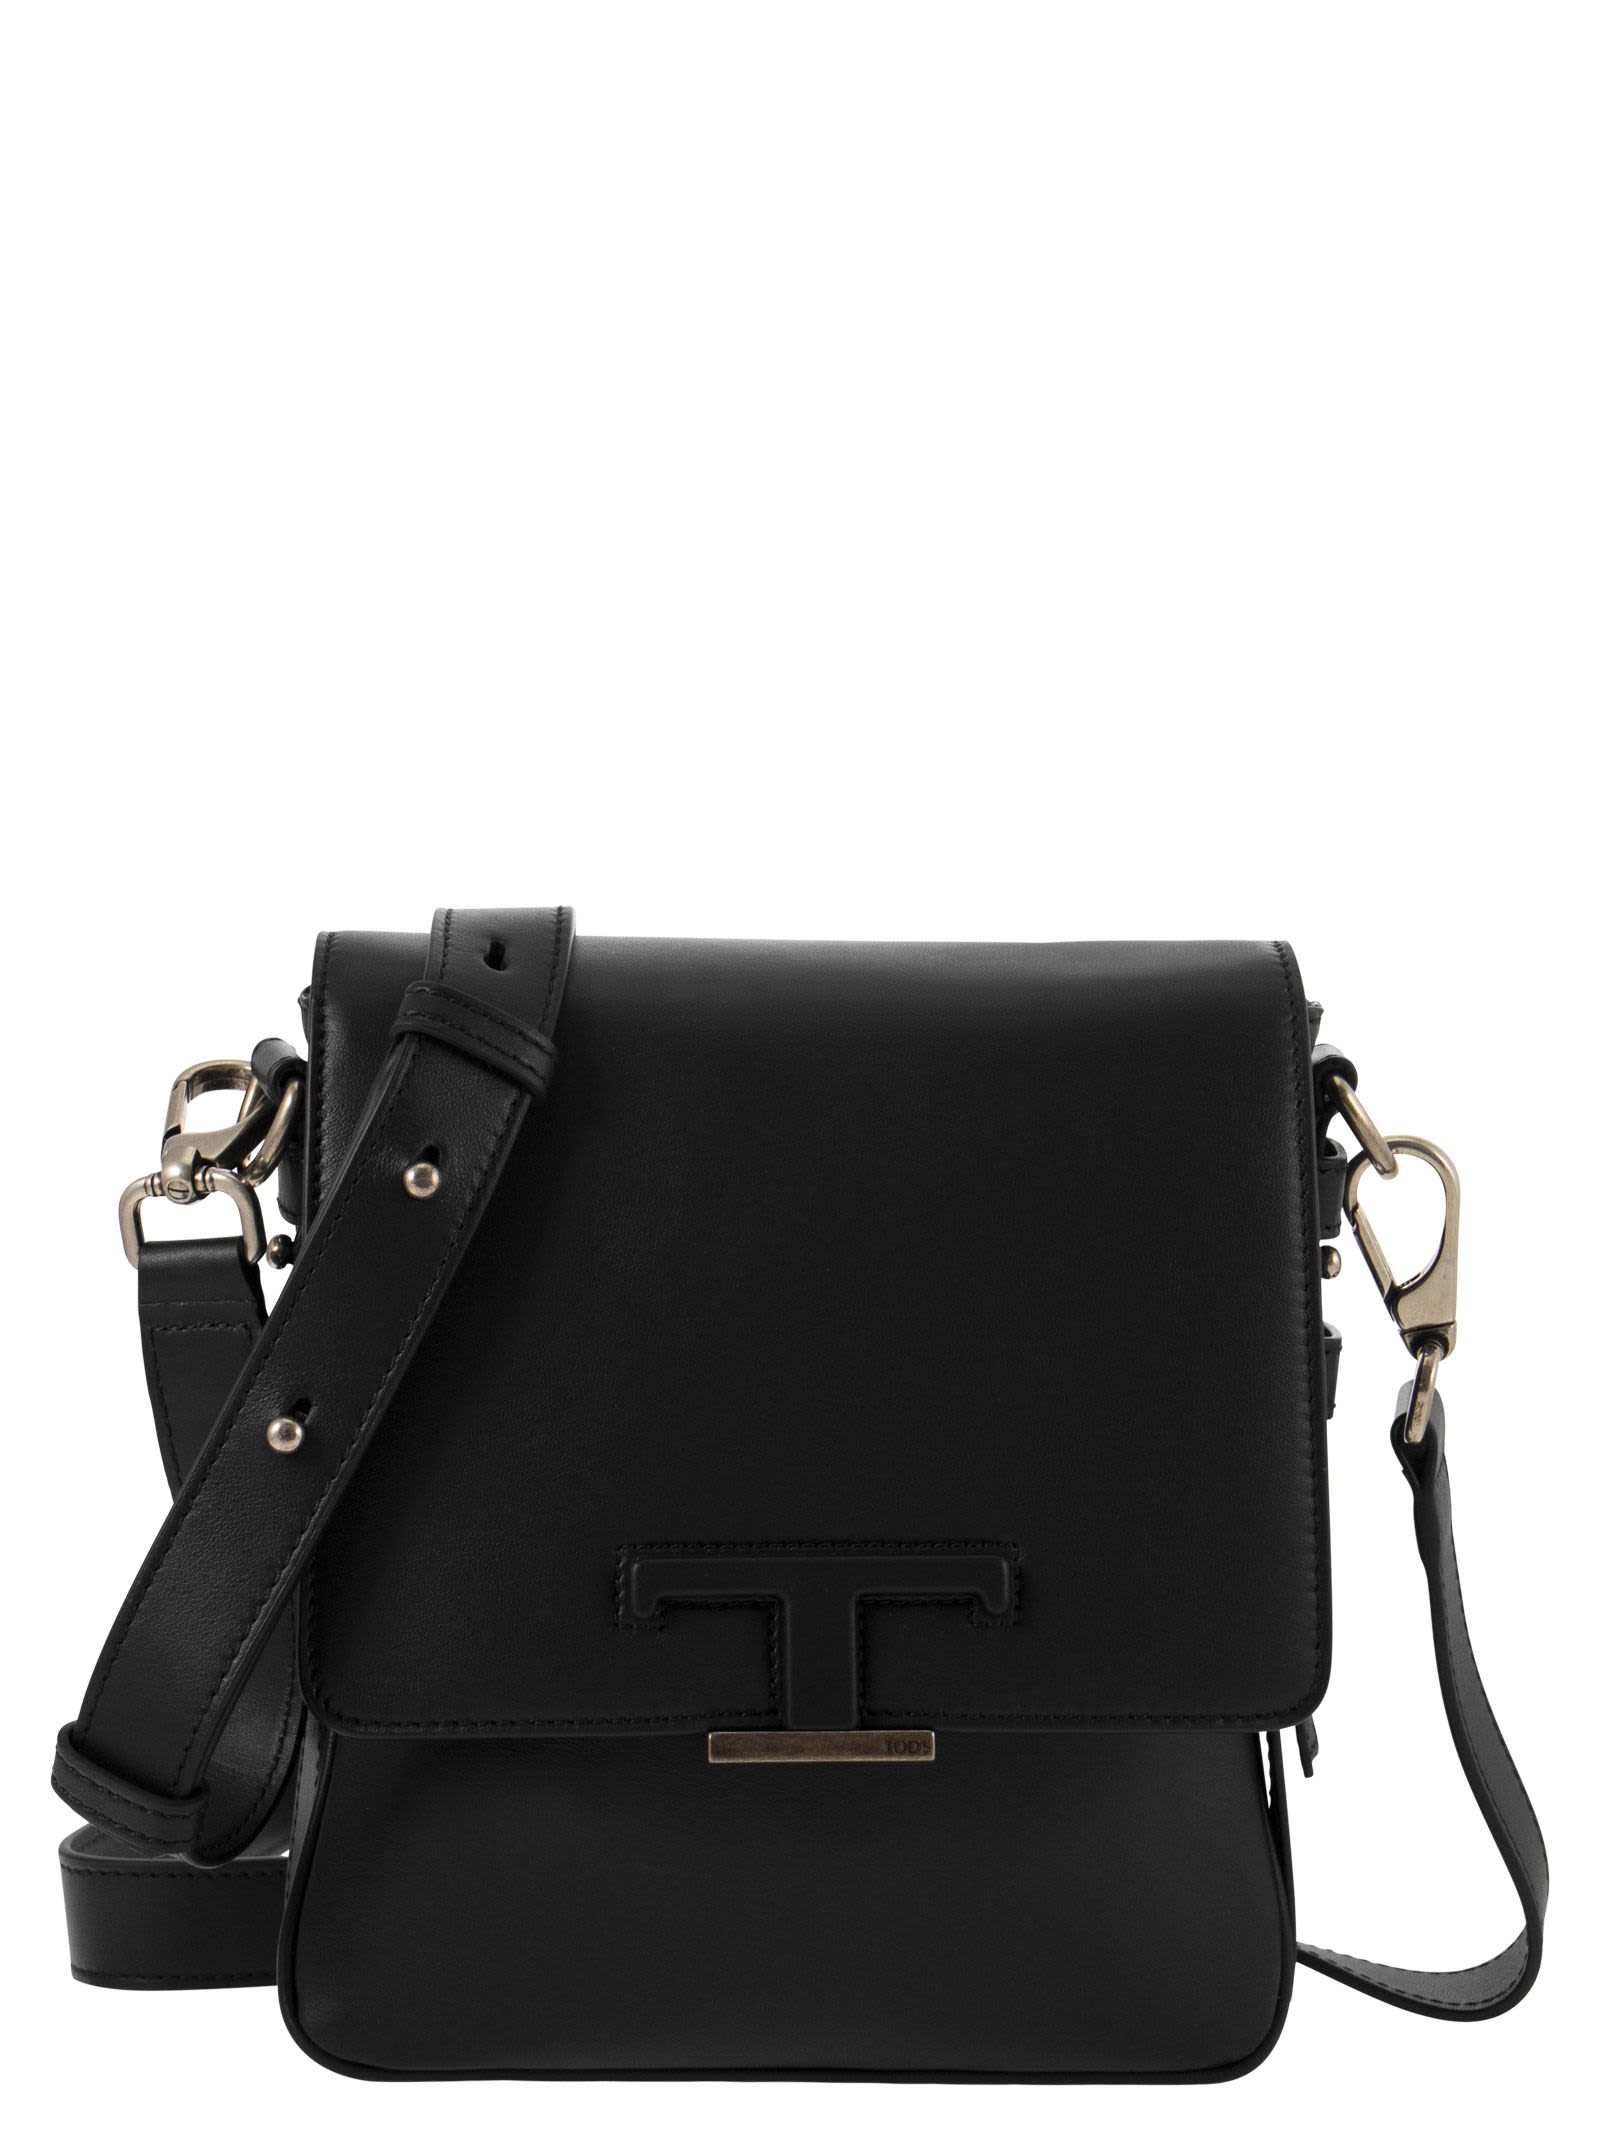 TOD'S T TIMELESS - MINI LEATHER SHOULDER STRAP